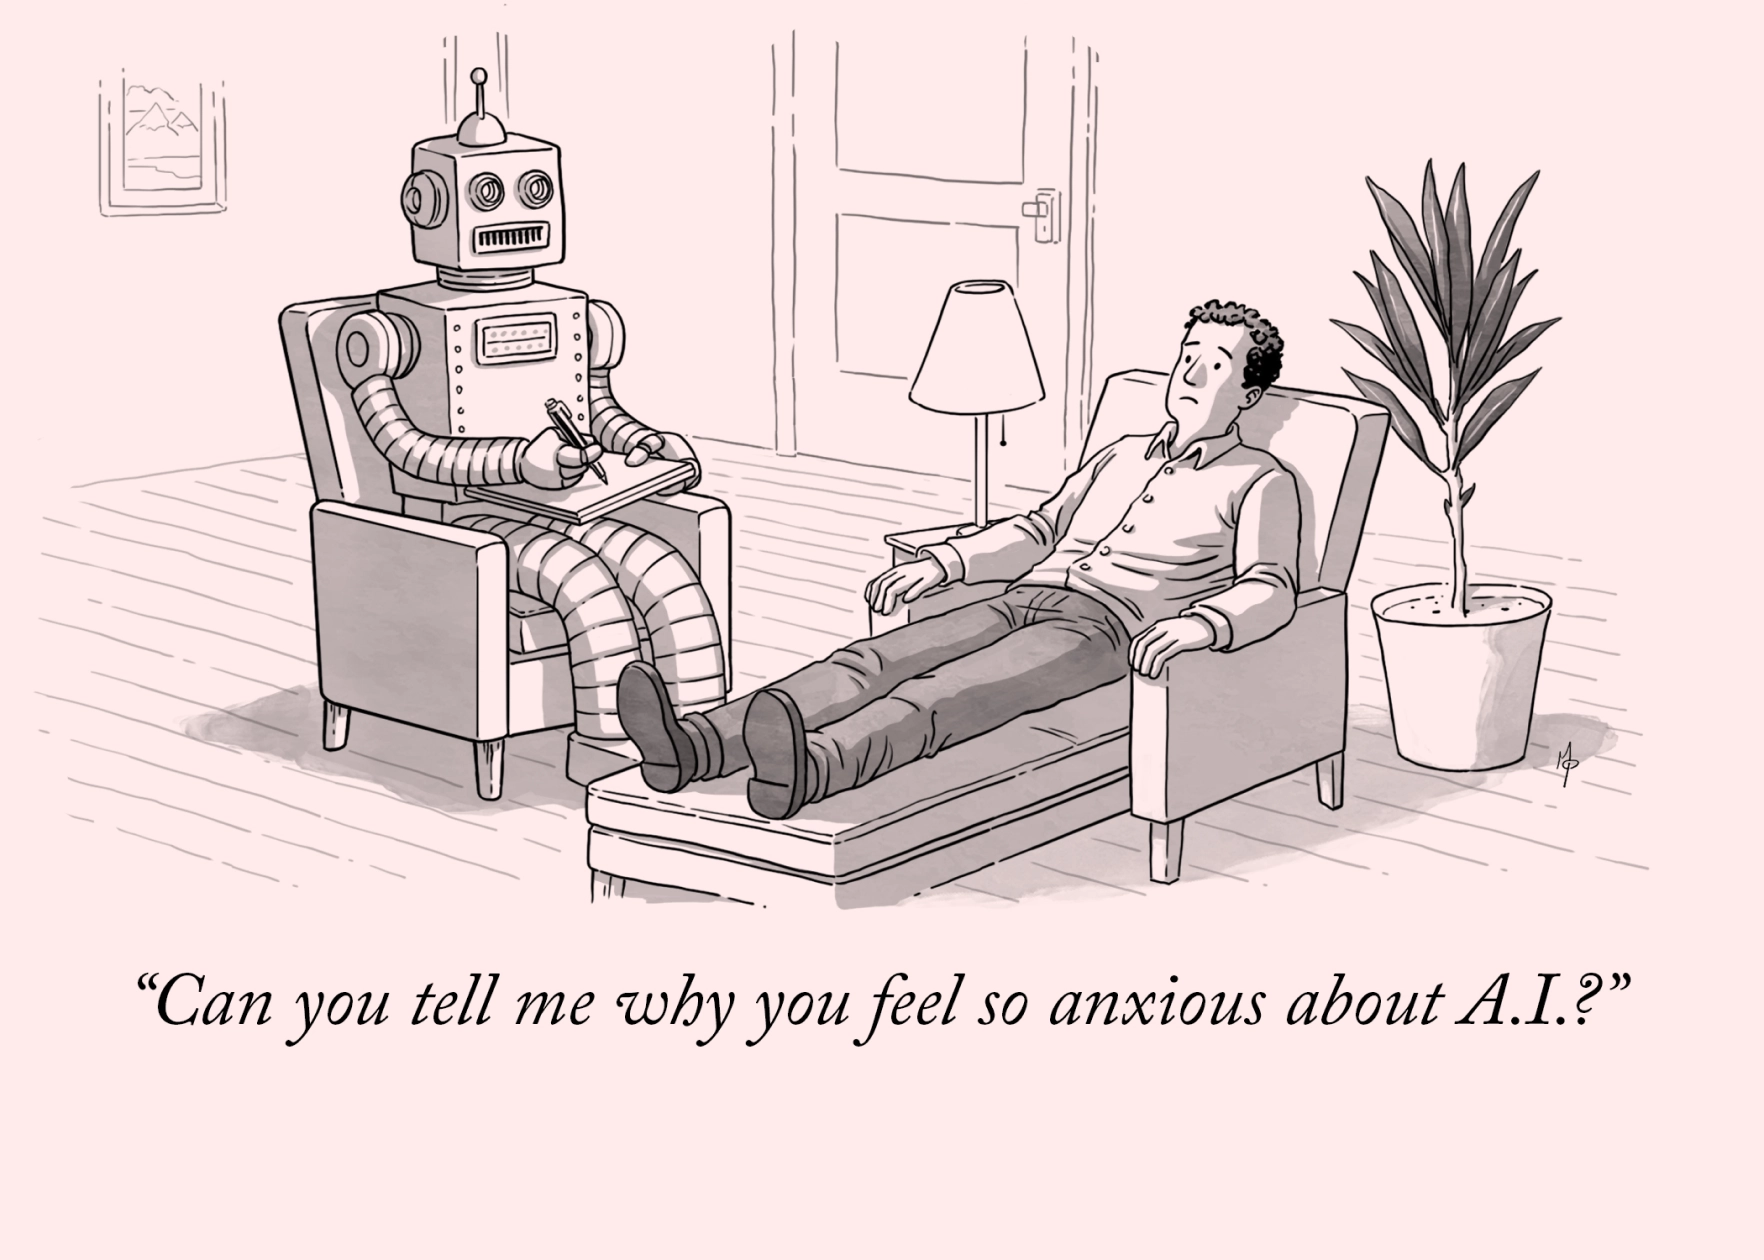 A cartoon-style illustration of a man having a psychotherapy session. He is lying in a reclining sofa chair with an unsettled face. The psychotherapist is a robot, most likely powered by AI, sitting next to the man, holding a pen and paper. The robot says: Can you tell me why you feel so anxious about A.I.?